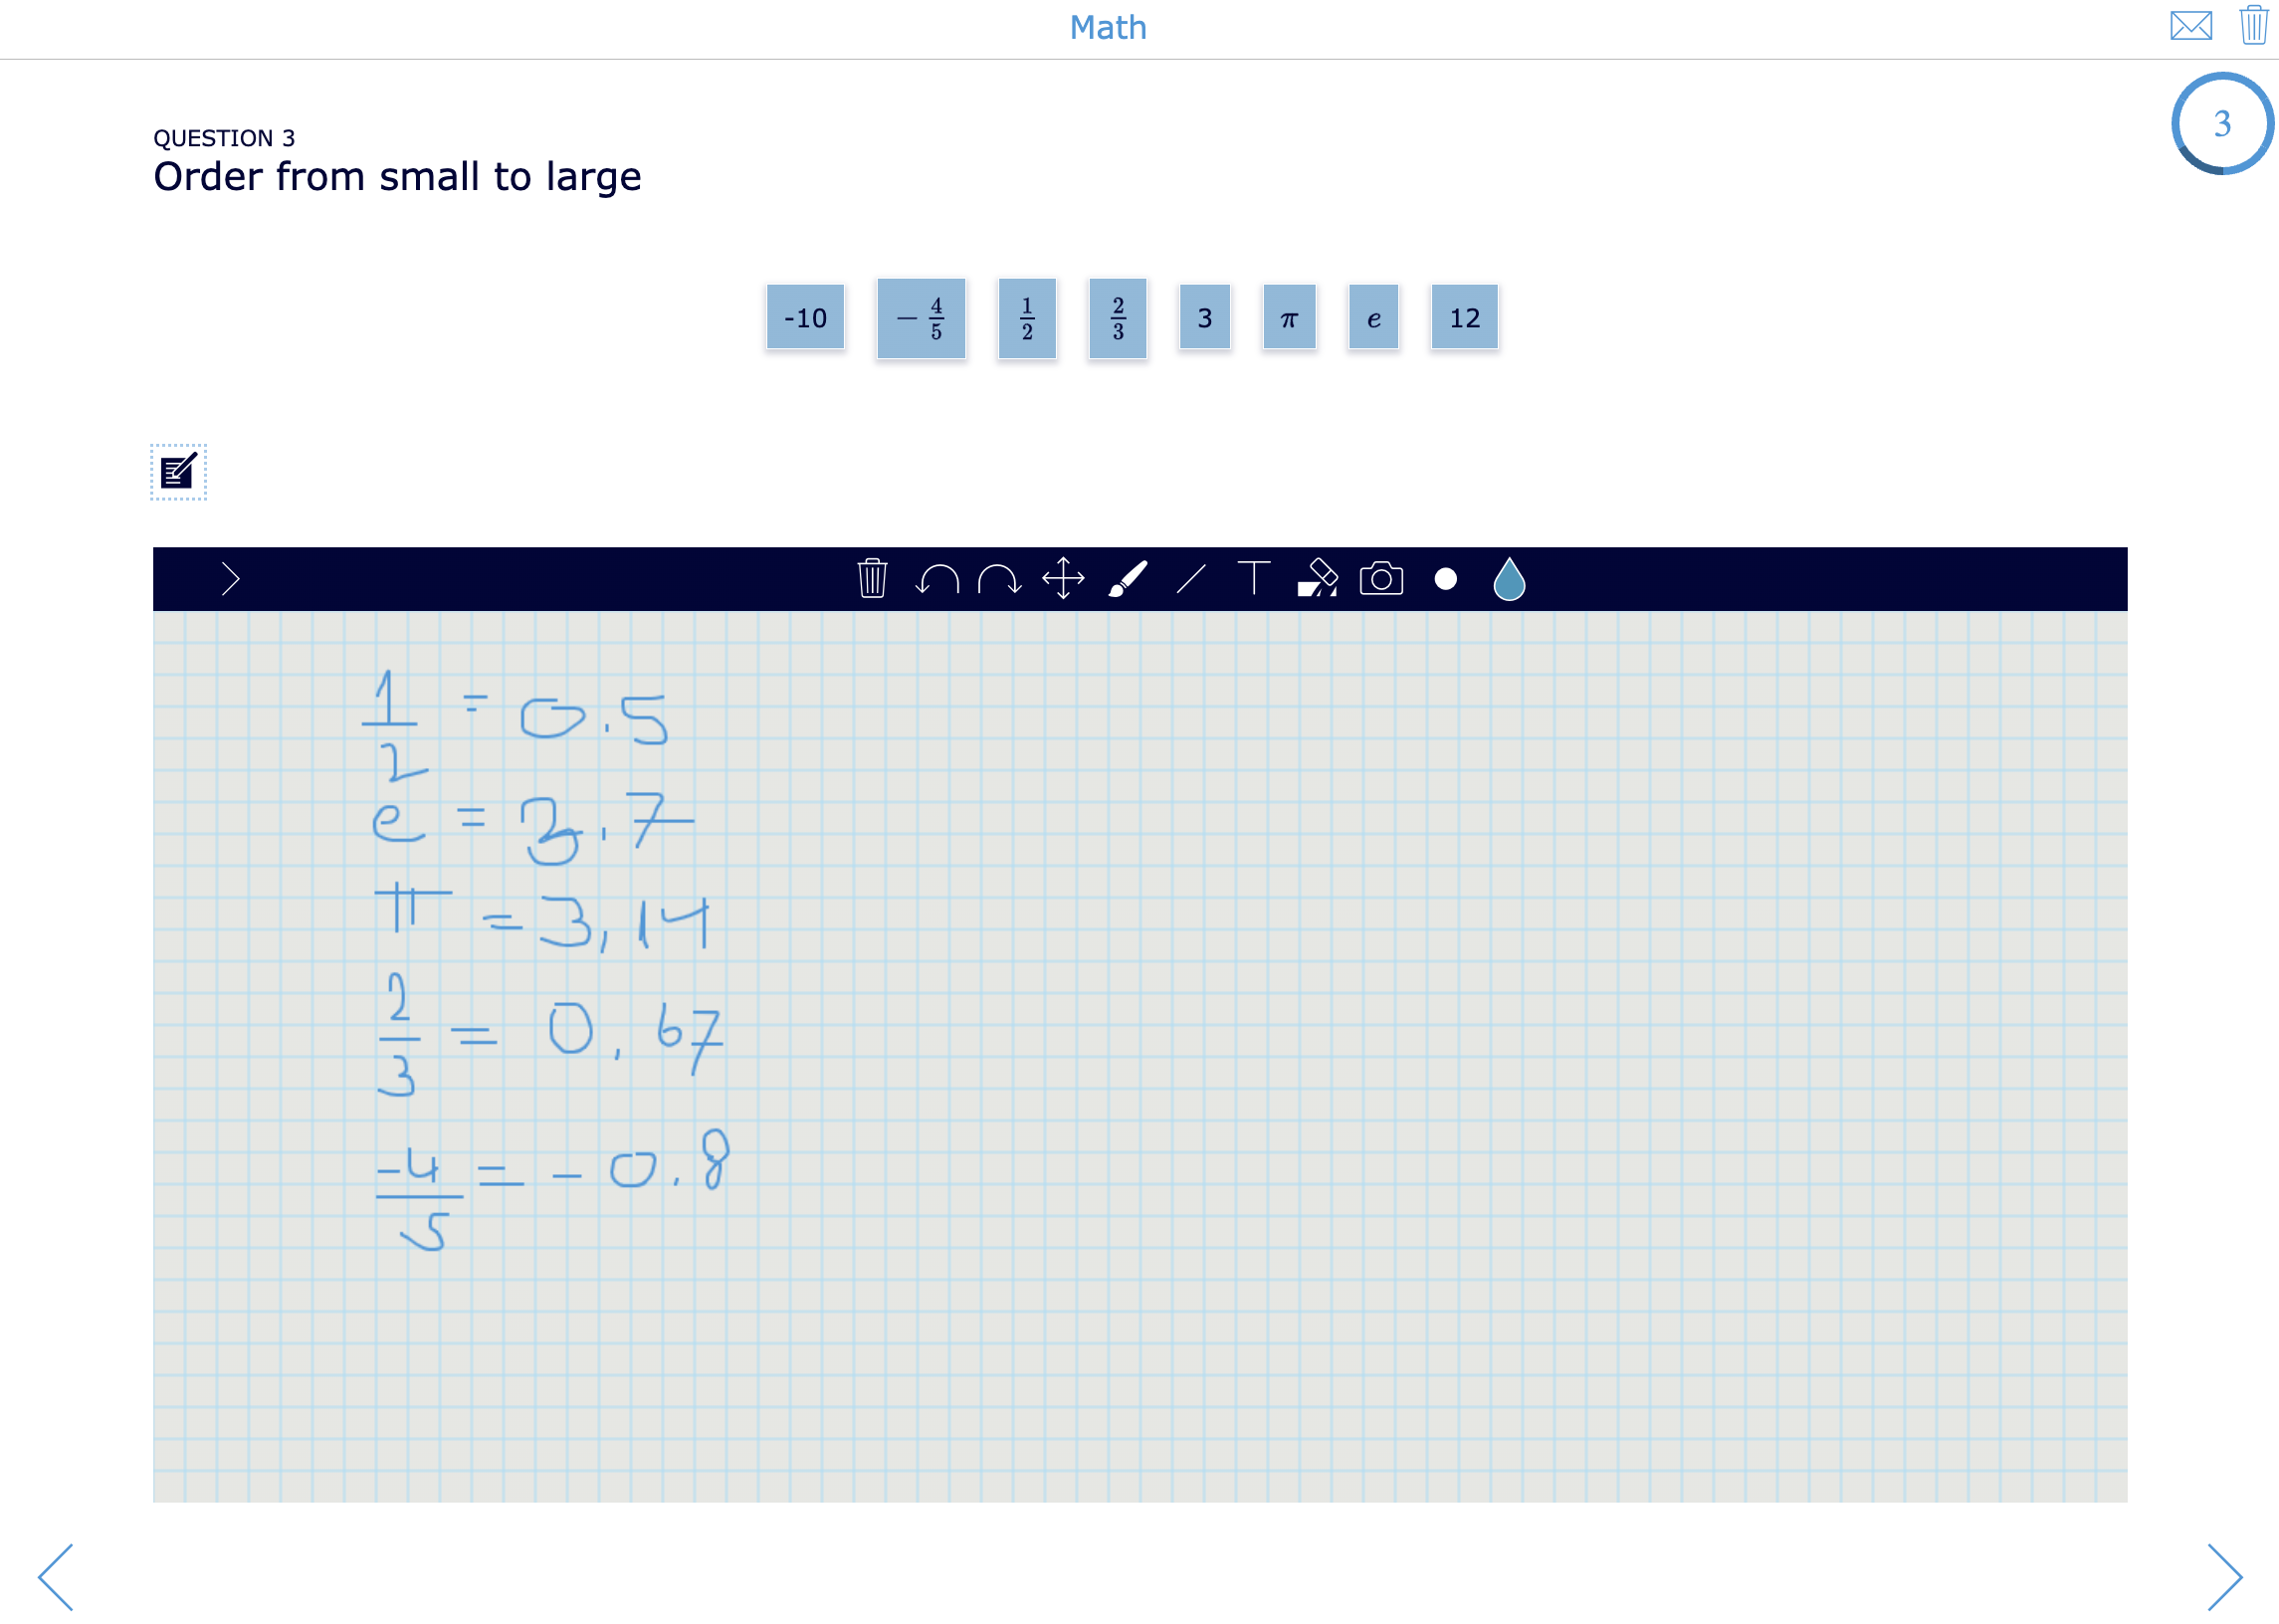 Student scratchpad notes in BookWidgets